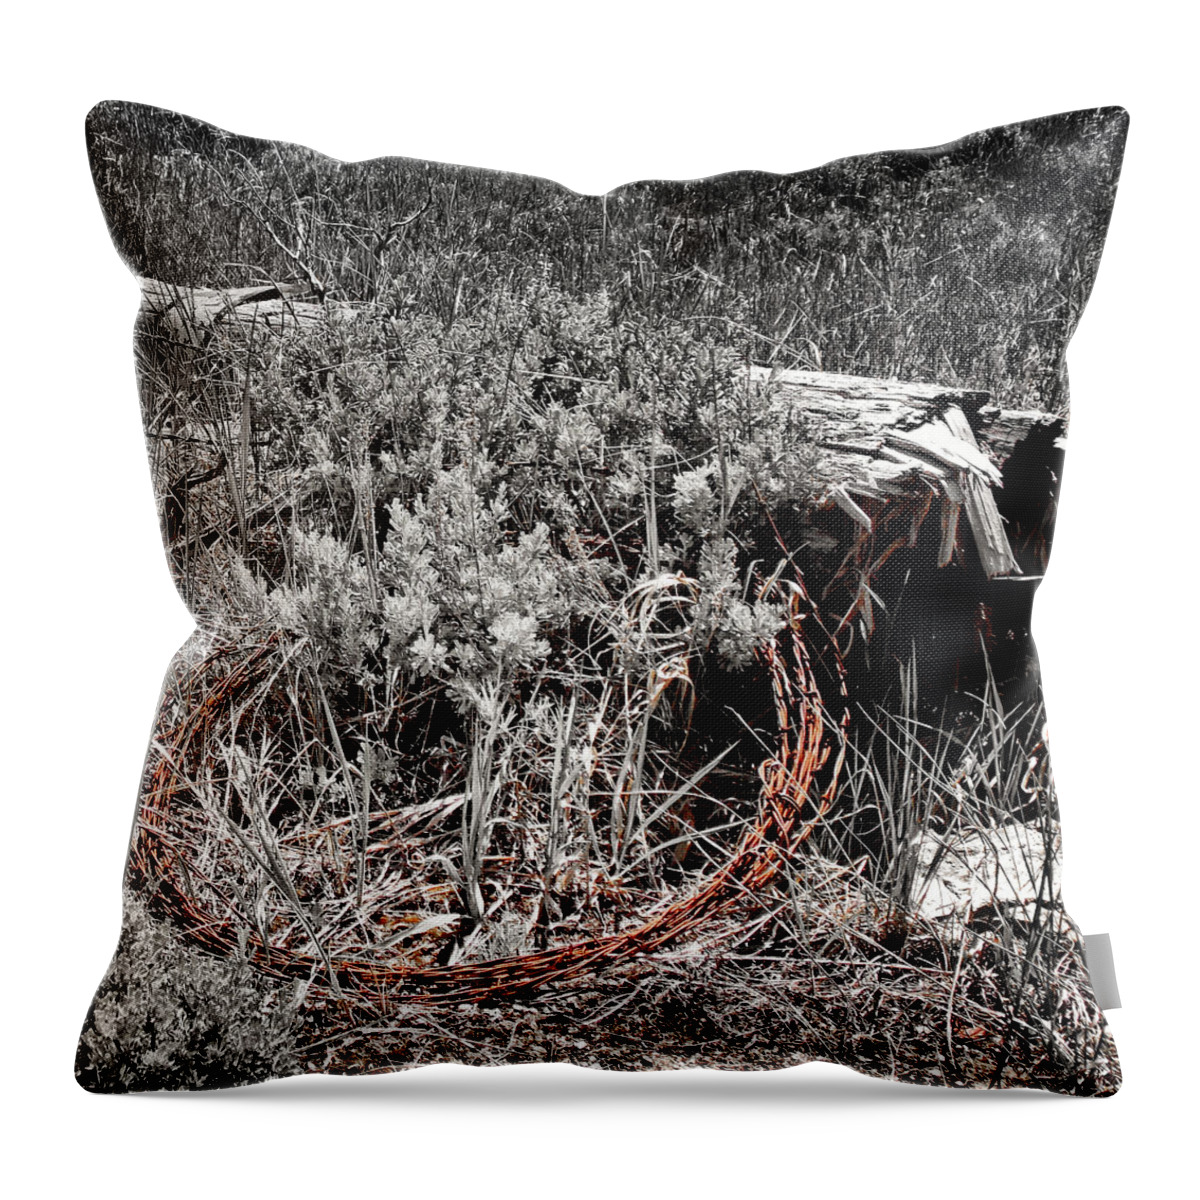 Barbwire Throw Pillow featuring the photograph Barbwire Wreath 1 by Susan Kinney